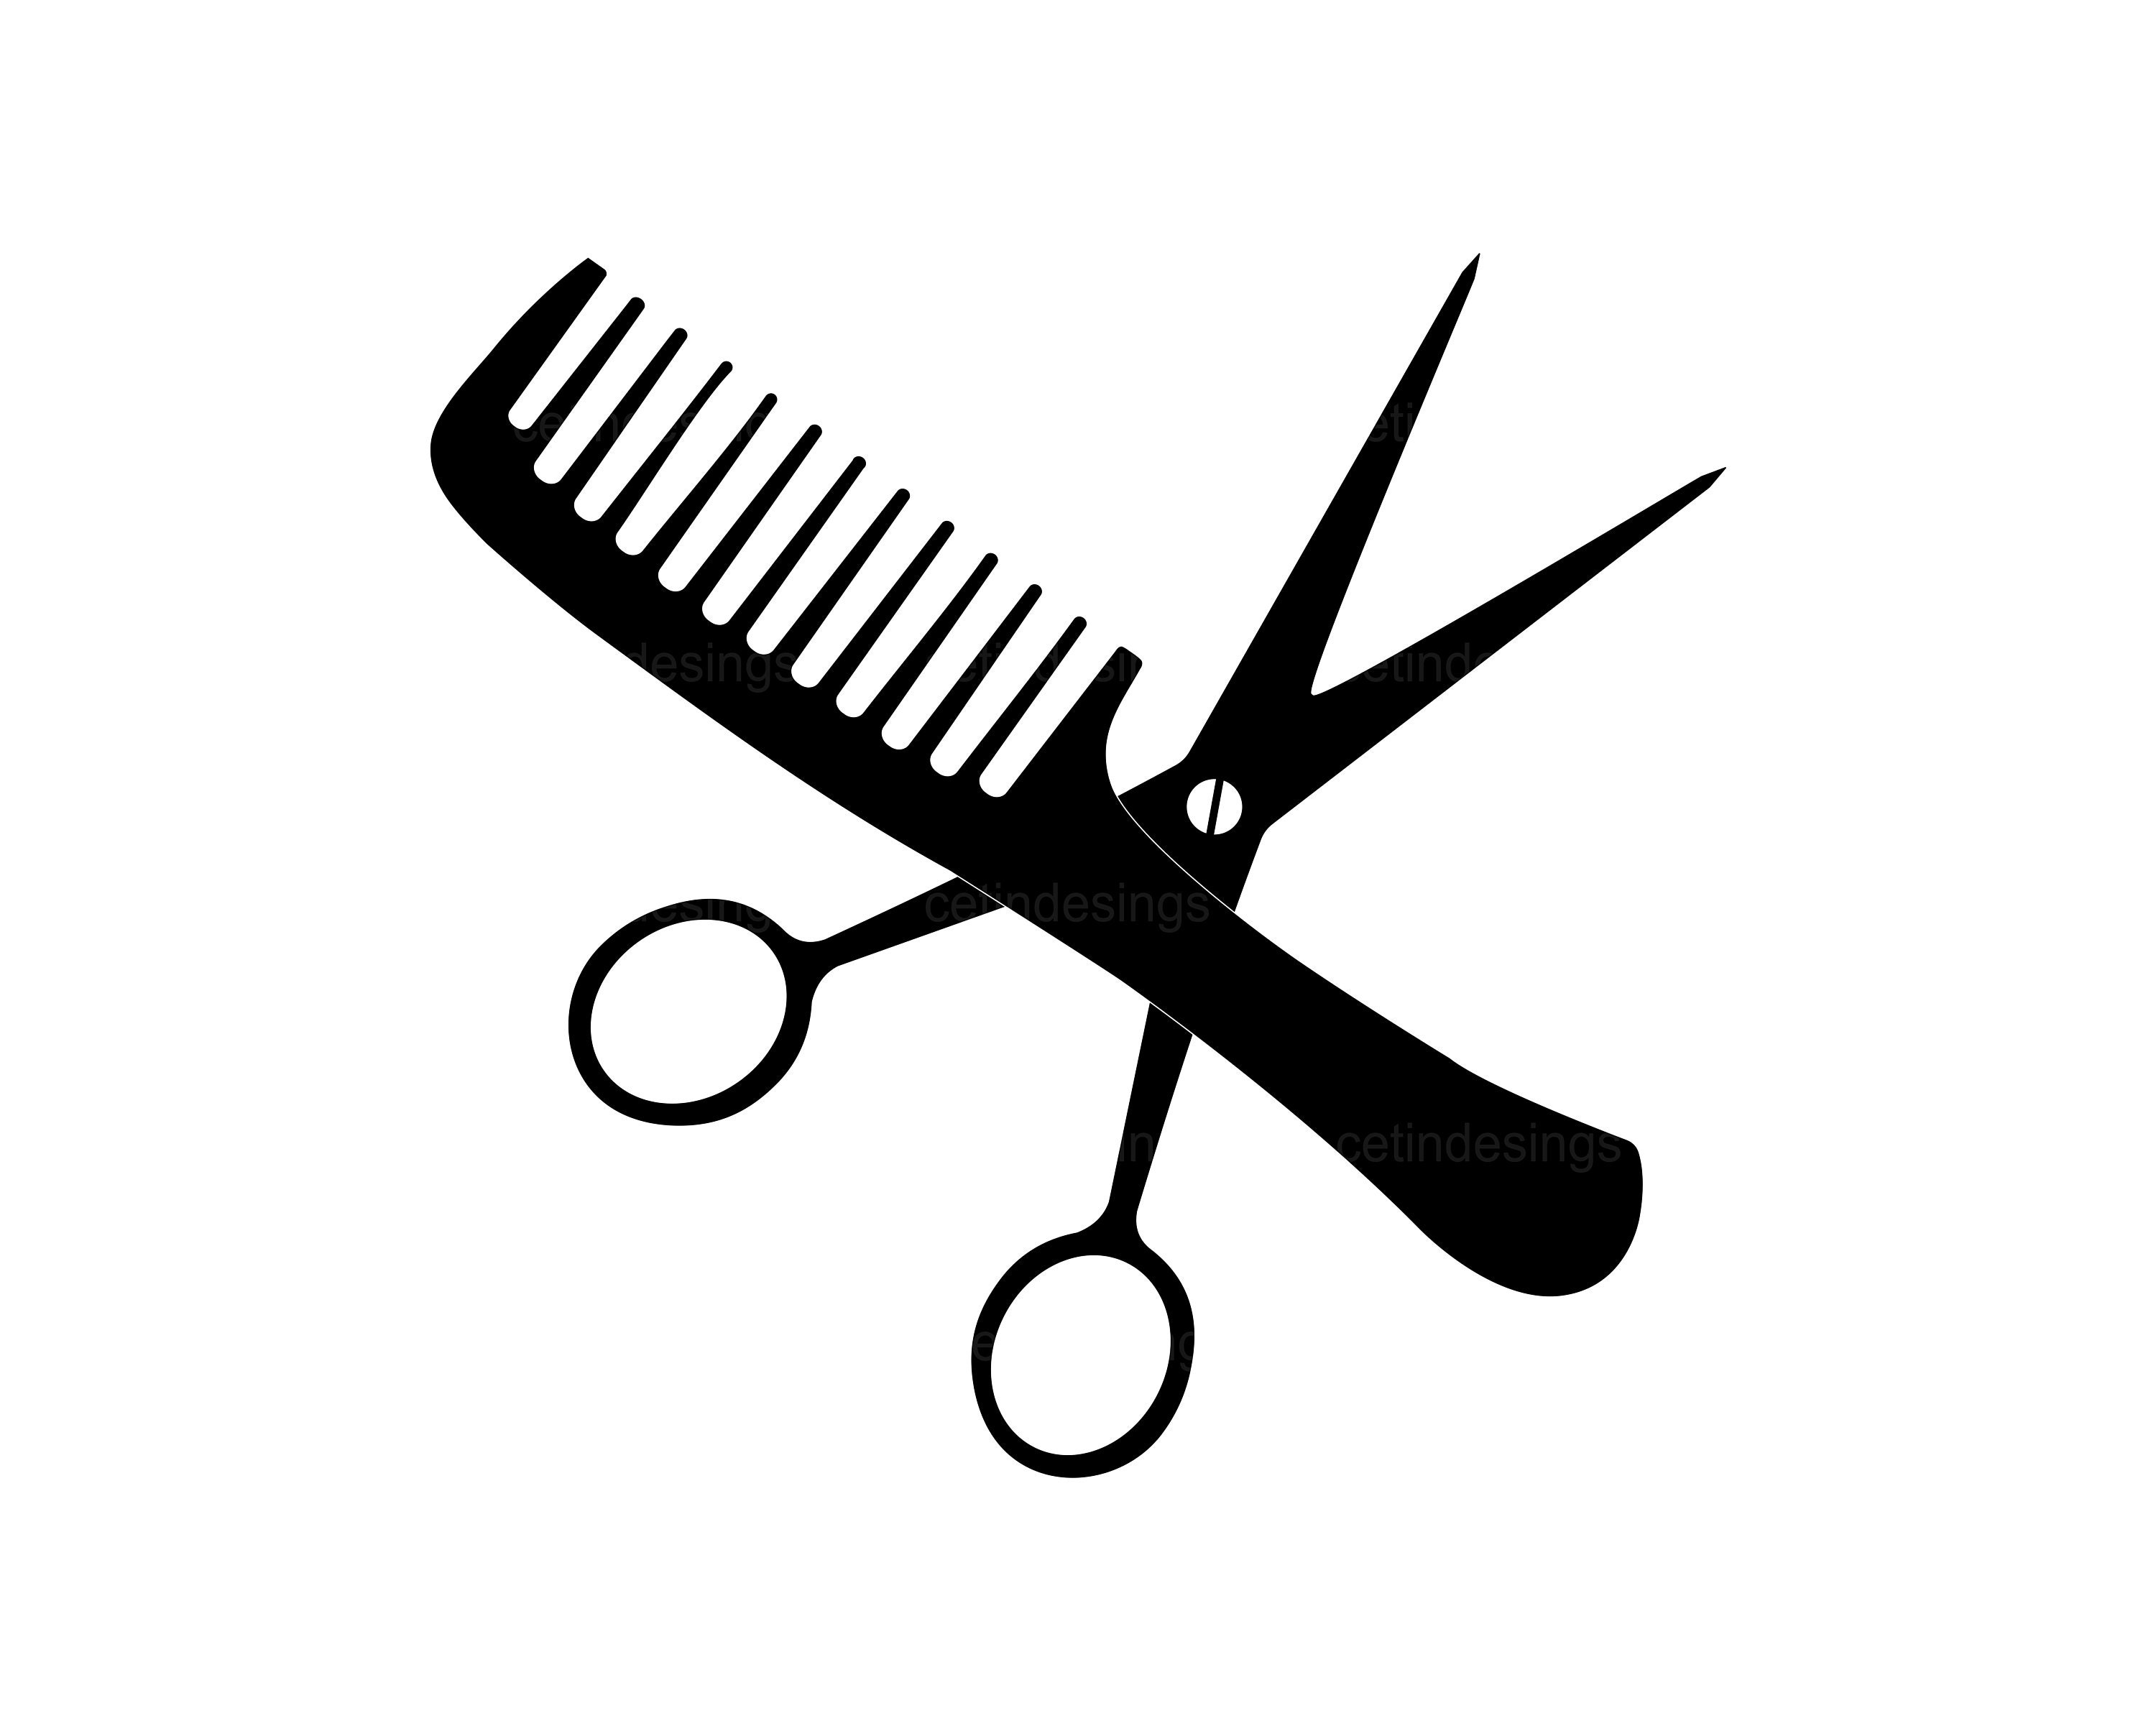 Scissors Icons in SVG, PNG, AI to Download